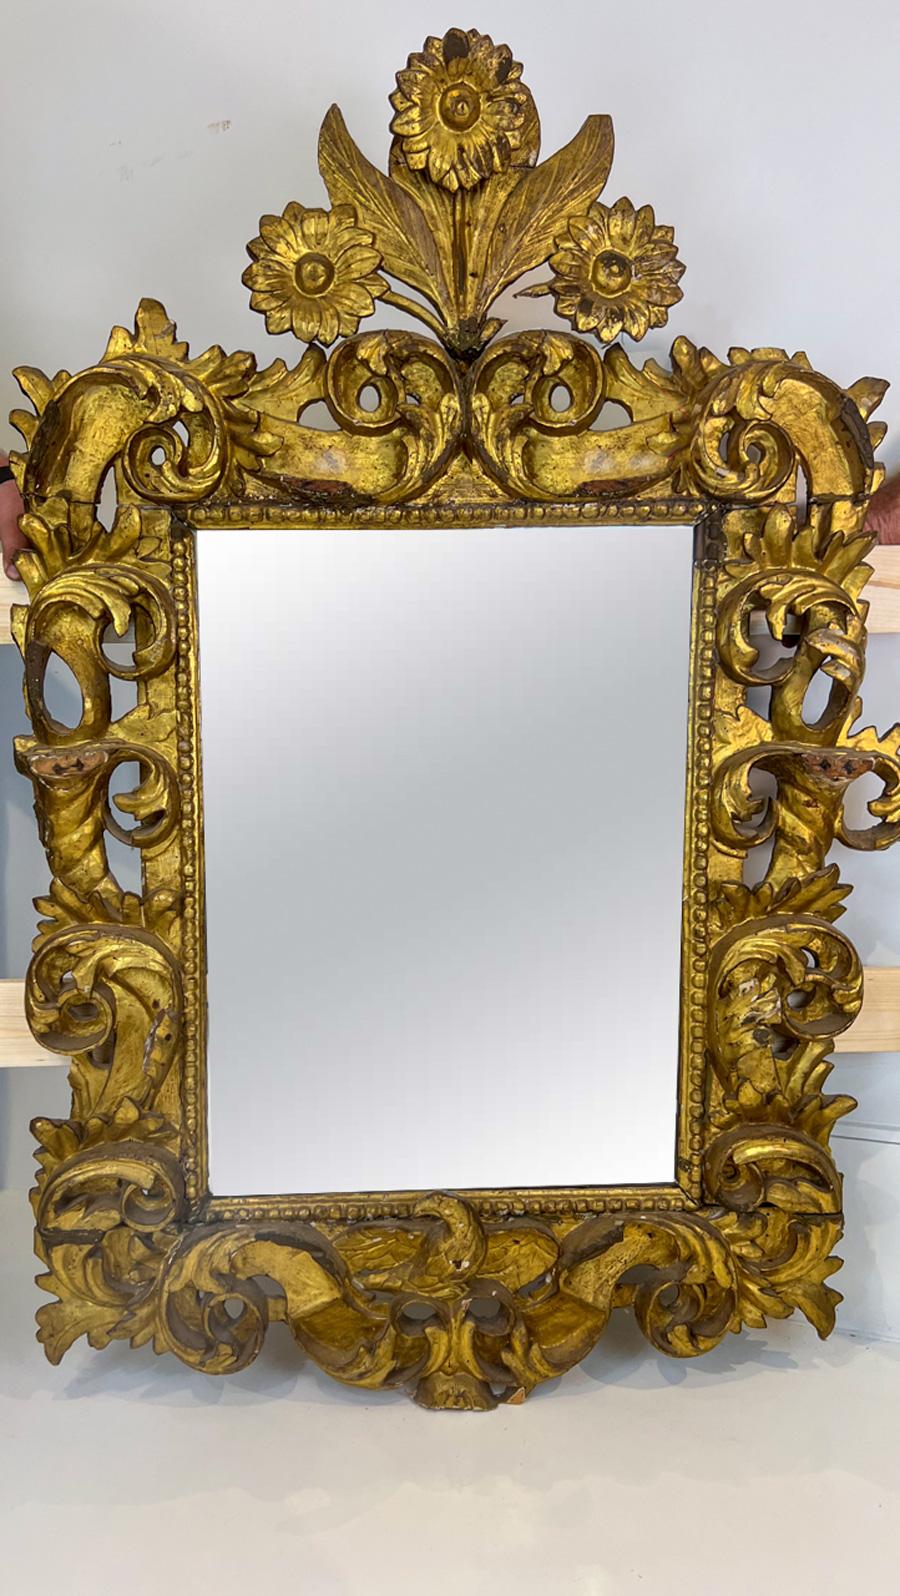 A beautiful, ornately carved mirror. The top-most ornament is a large sunflower.